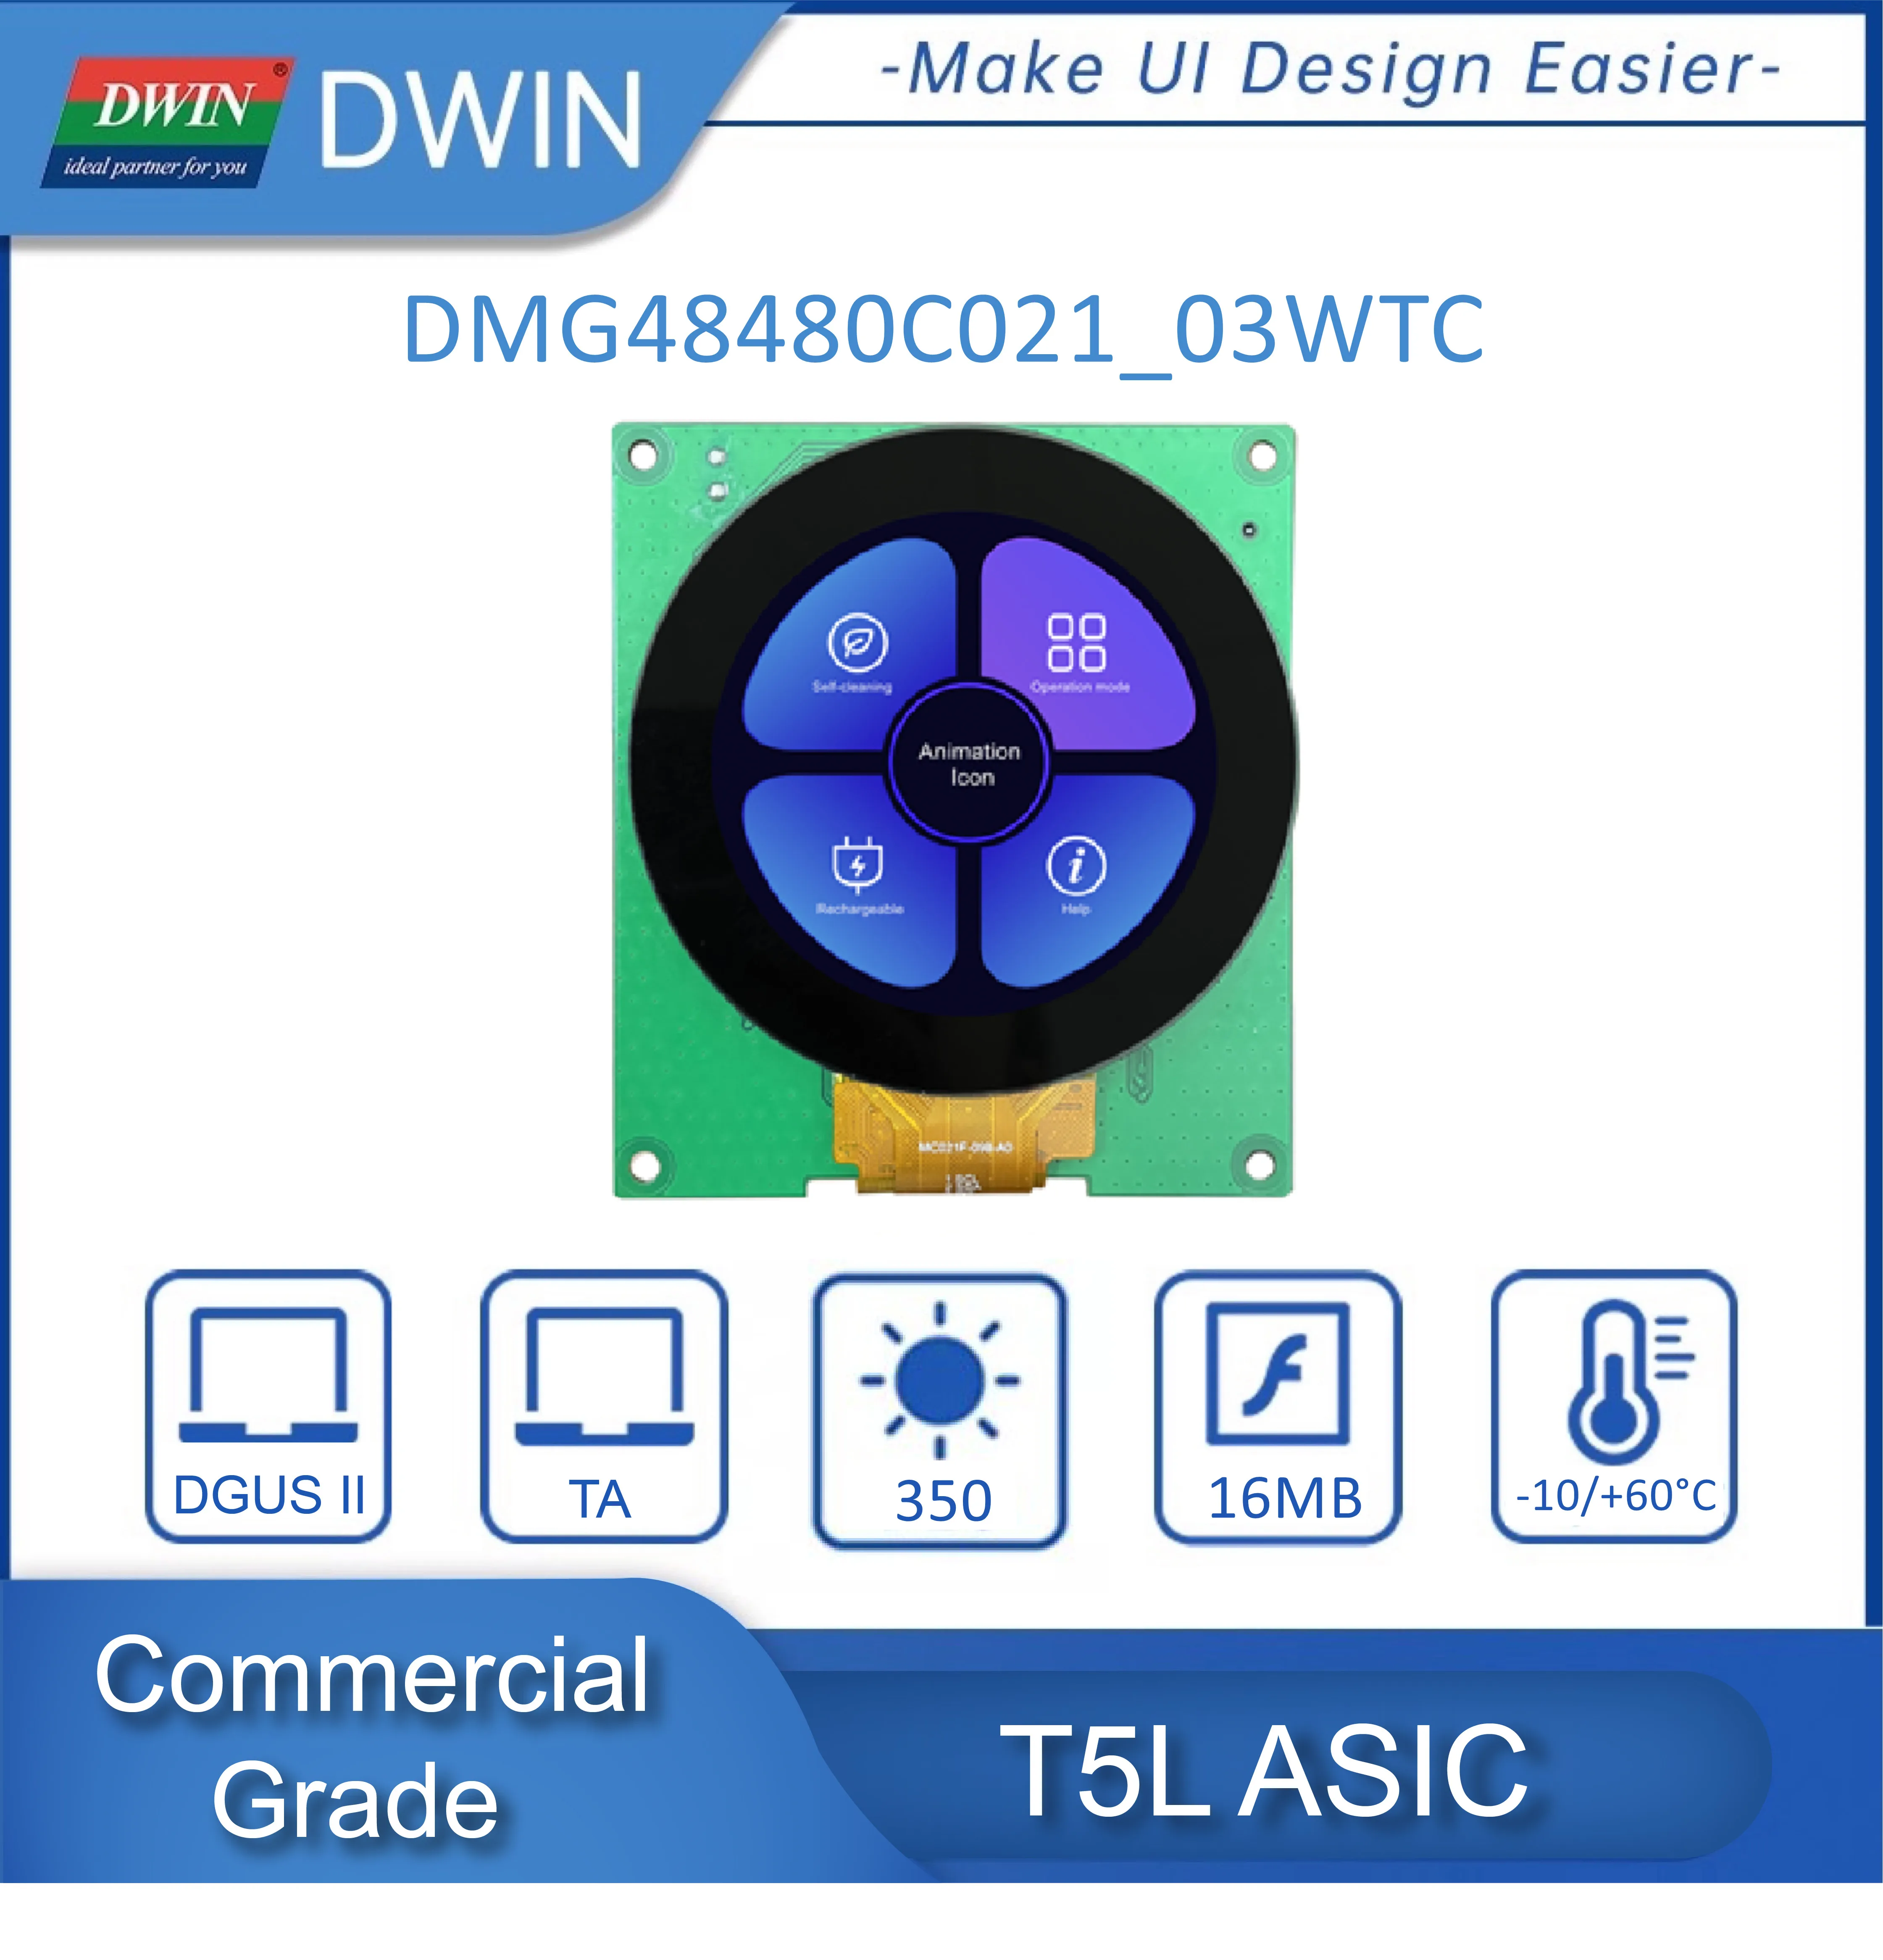 DWIN New Arrival 2.1 Inch Electronic Modules Circular Display IPS Home Automation CTP UART Port Smart LCM  DMG48480C021_03WTC